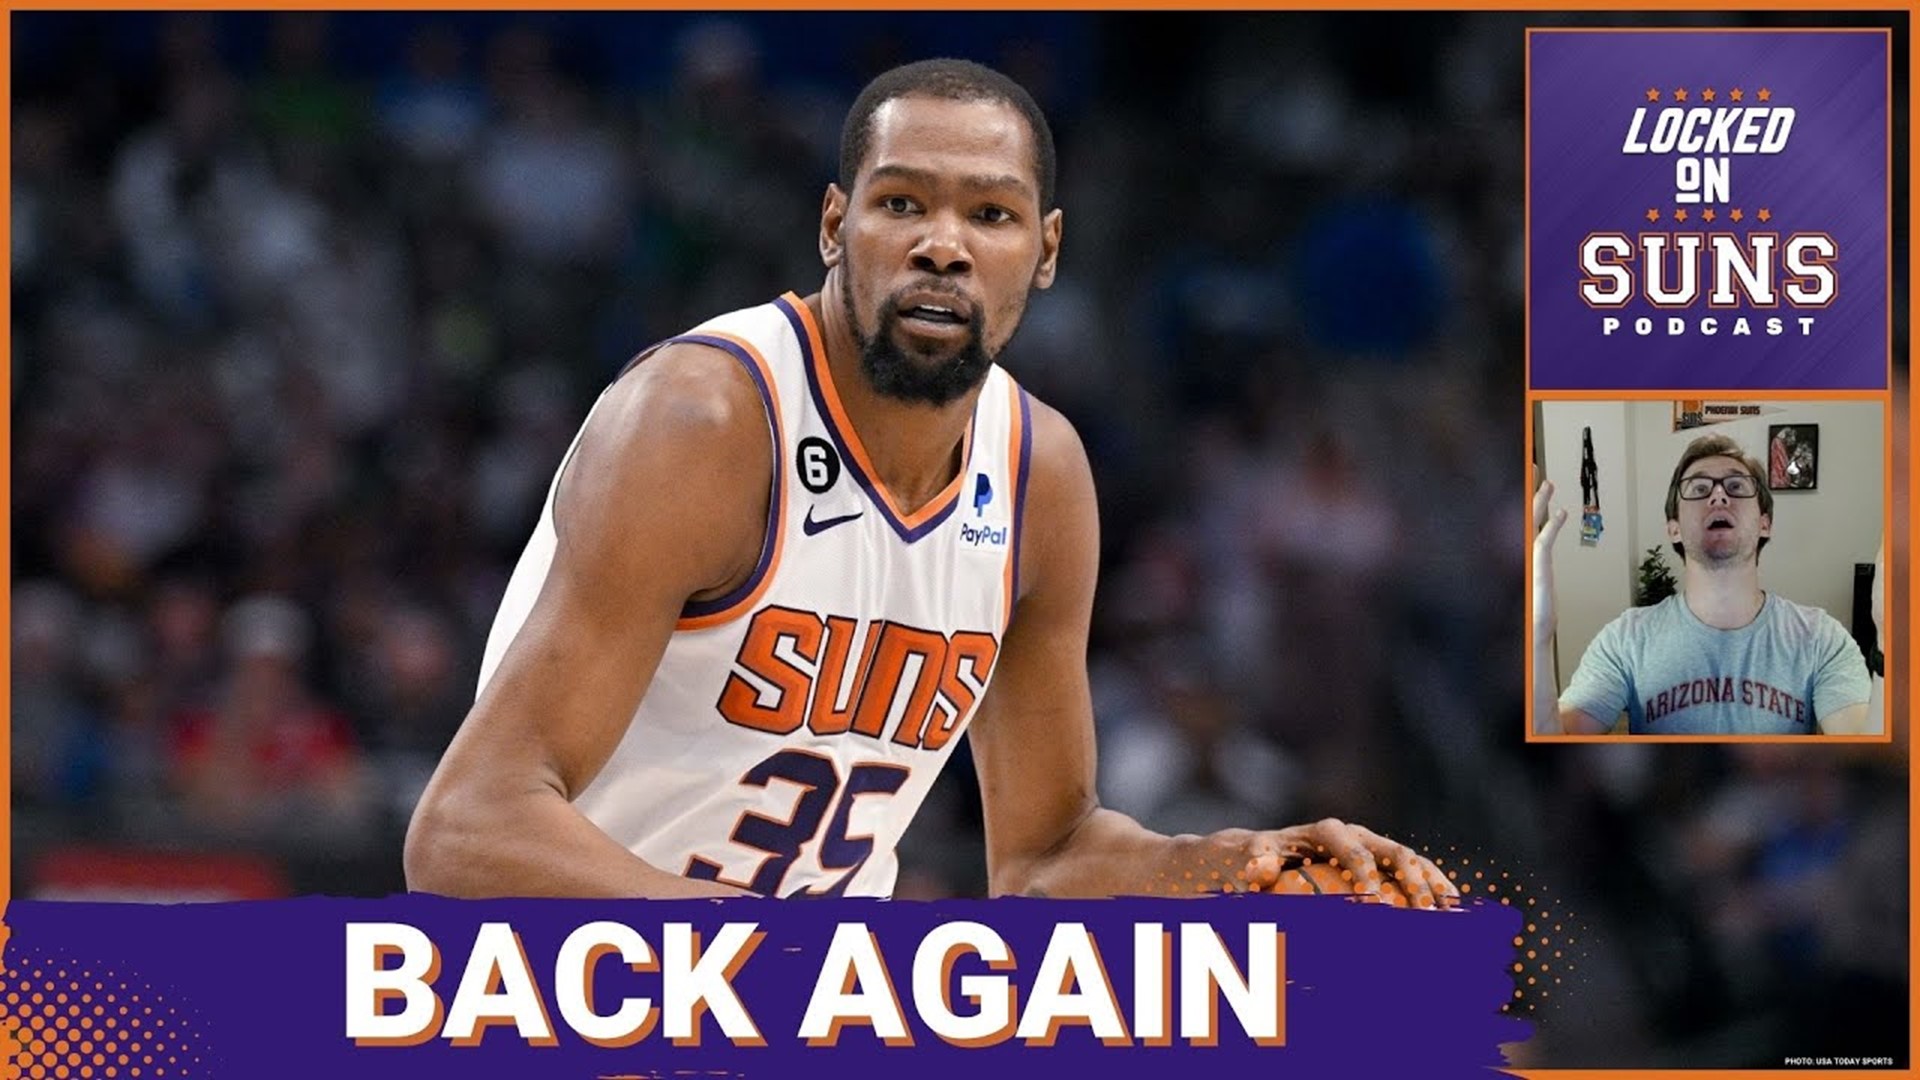 Kevin Durant is likely to return to the Phoenix Suns on Wednesday night against Minnesota after a left ankle sprain sidelined him the past three weeks.